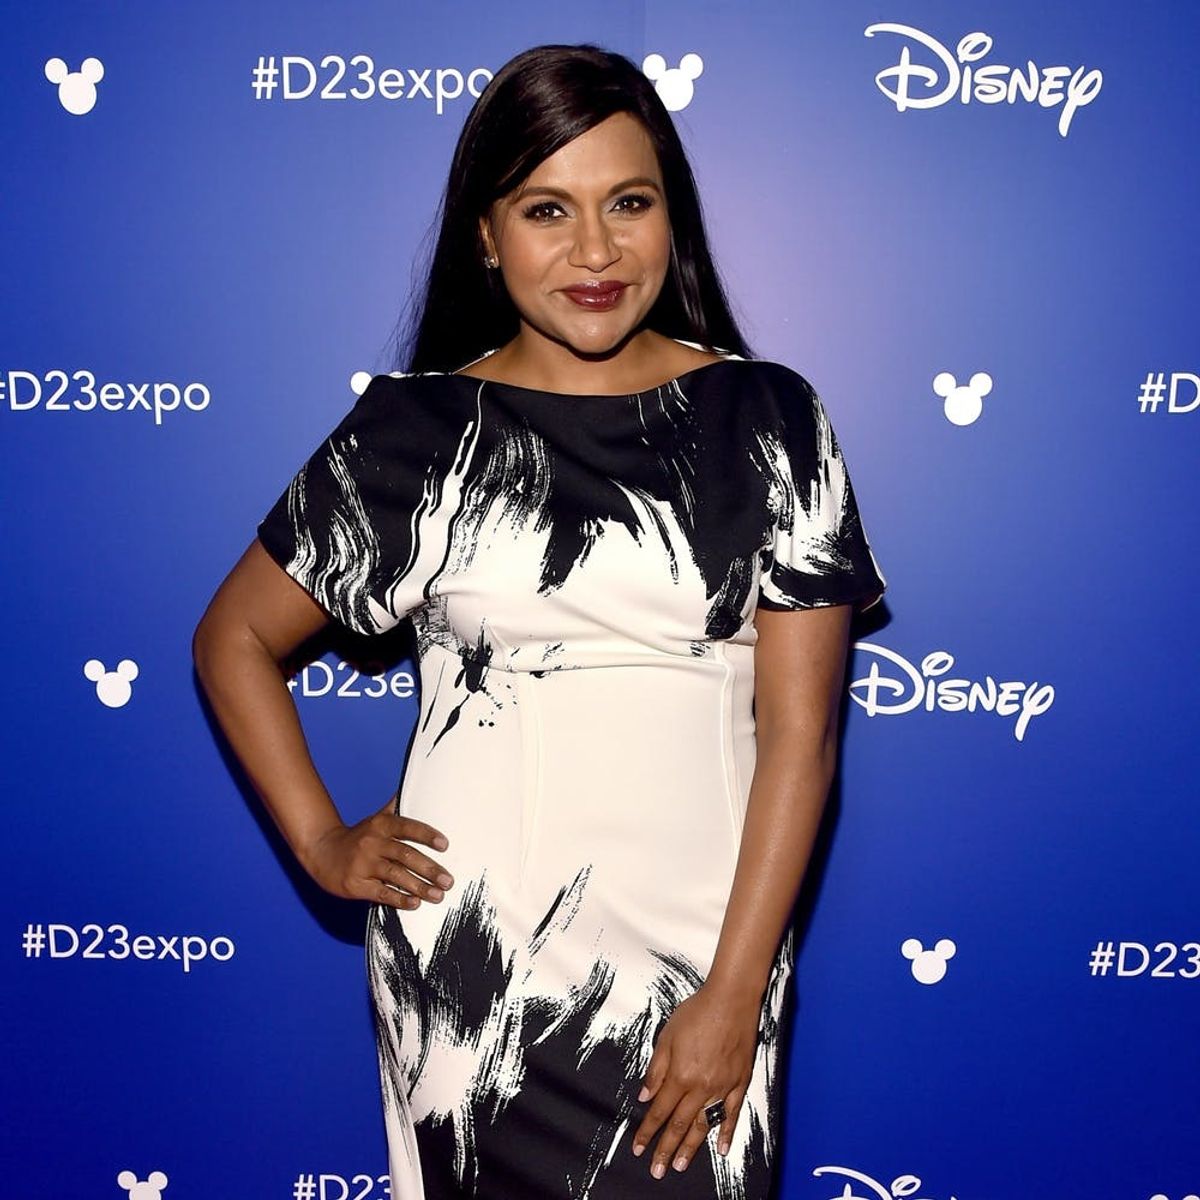 Mindy Kaling Says She’s “Really Excited” About Becoming a Mom